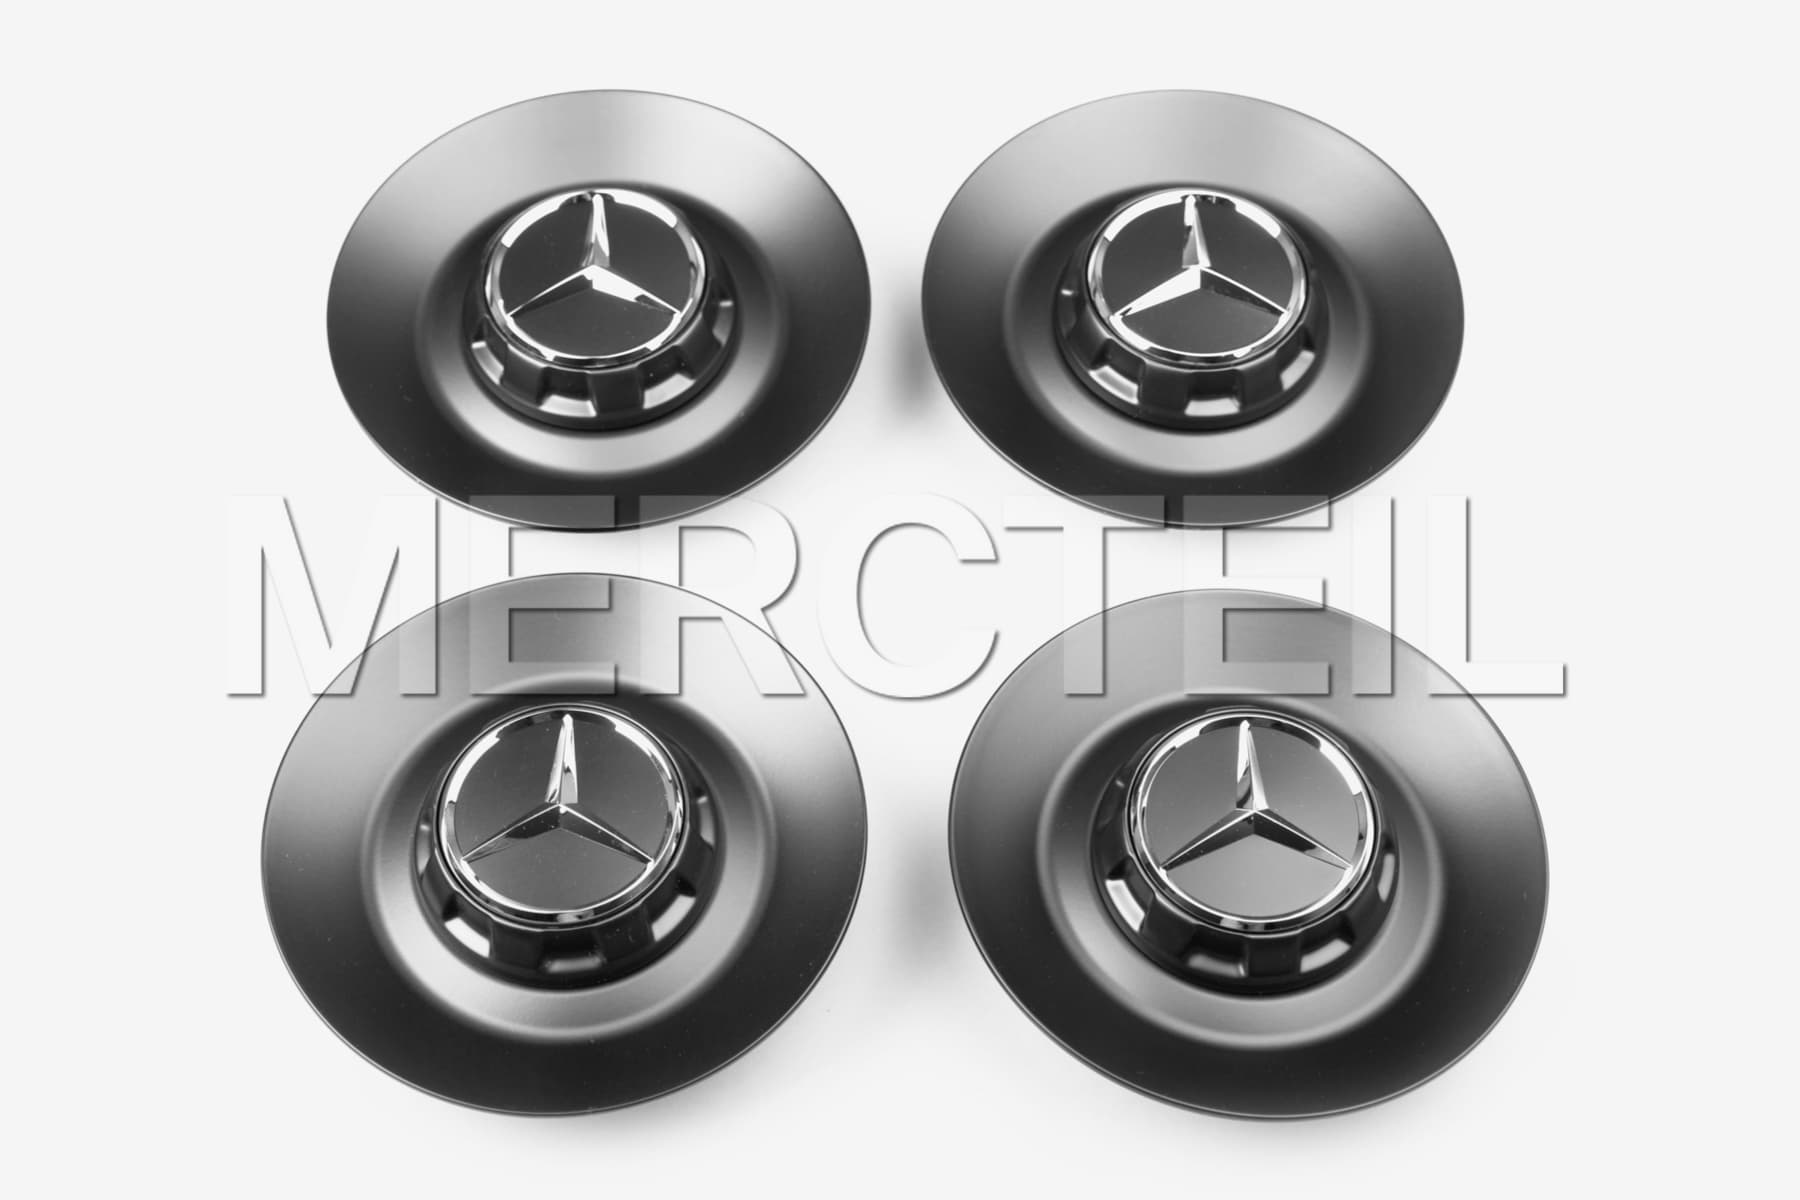 AMG Forged Wheels Hubcaps Kit Genuine Mercedes Benz (part number: A0004004300289283)